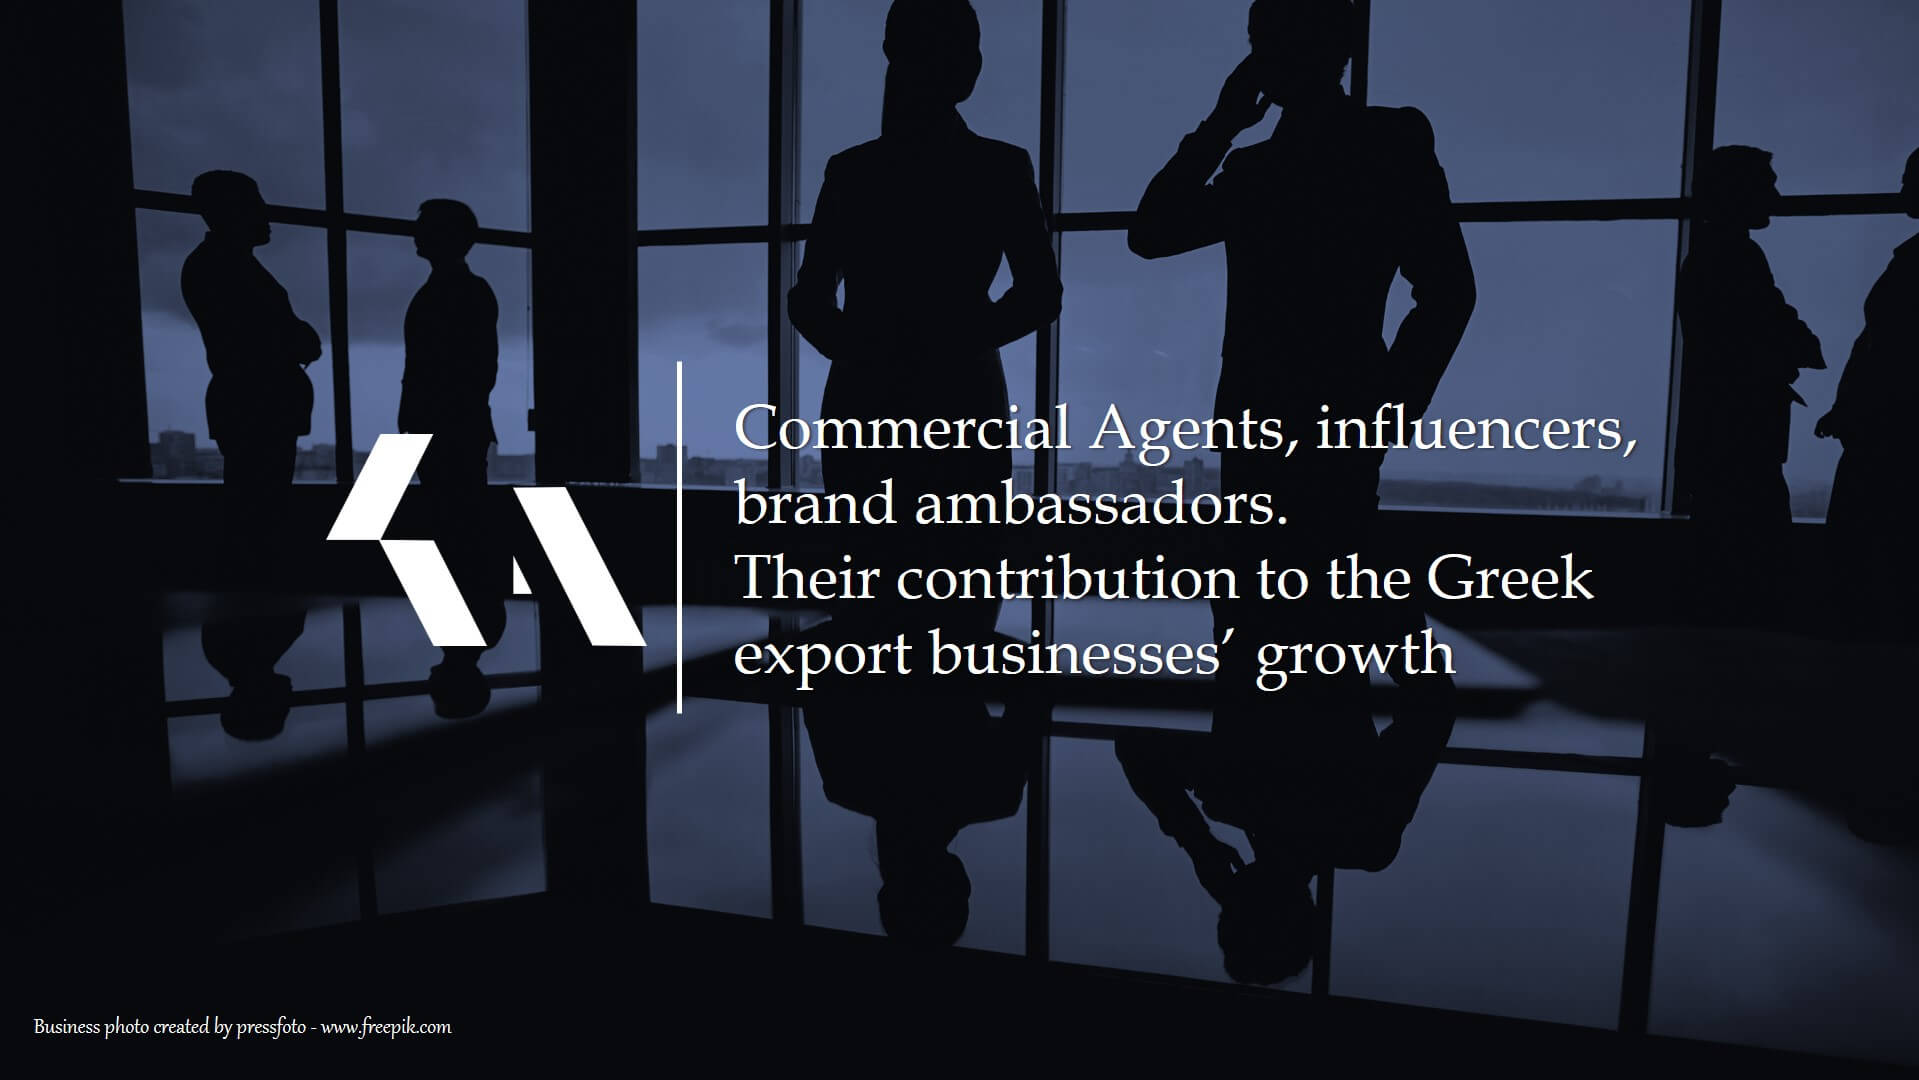 Commercial Agents and the Greek export businesses’ growth